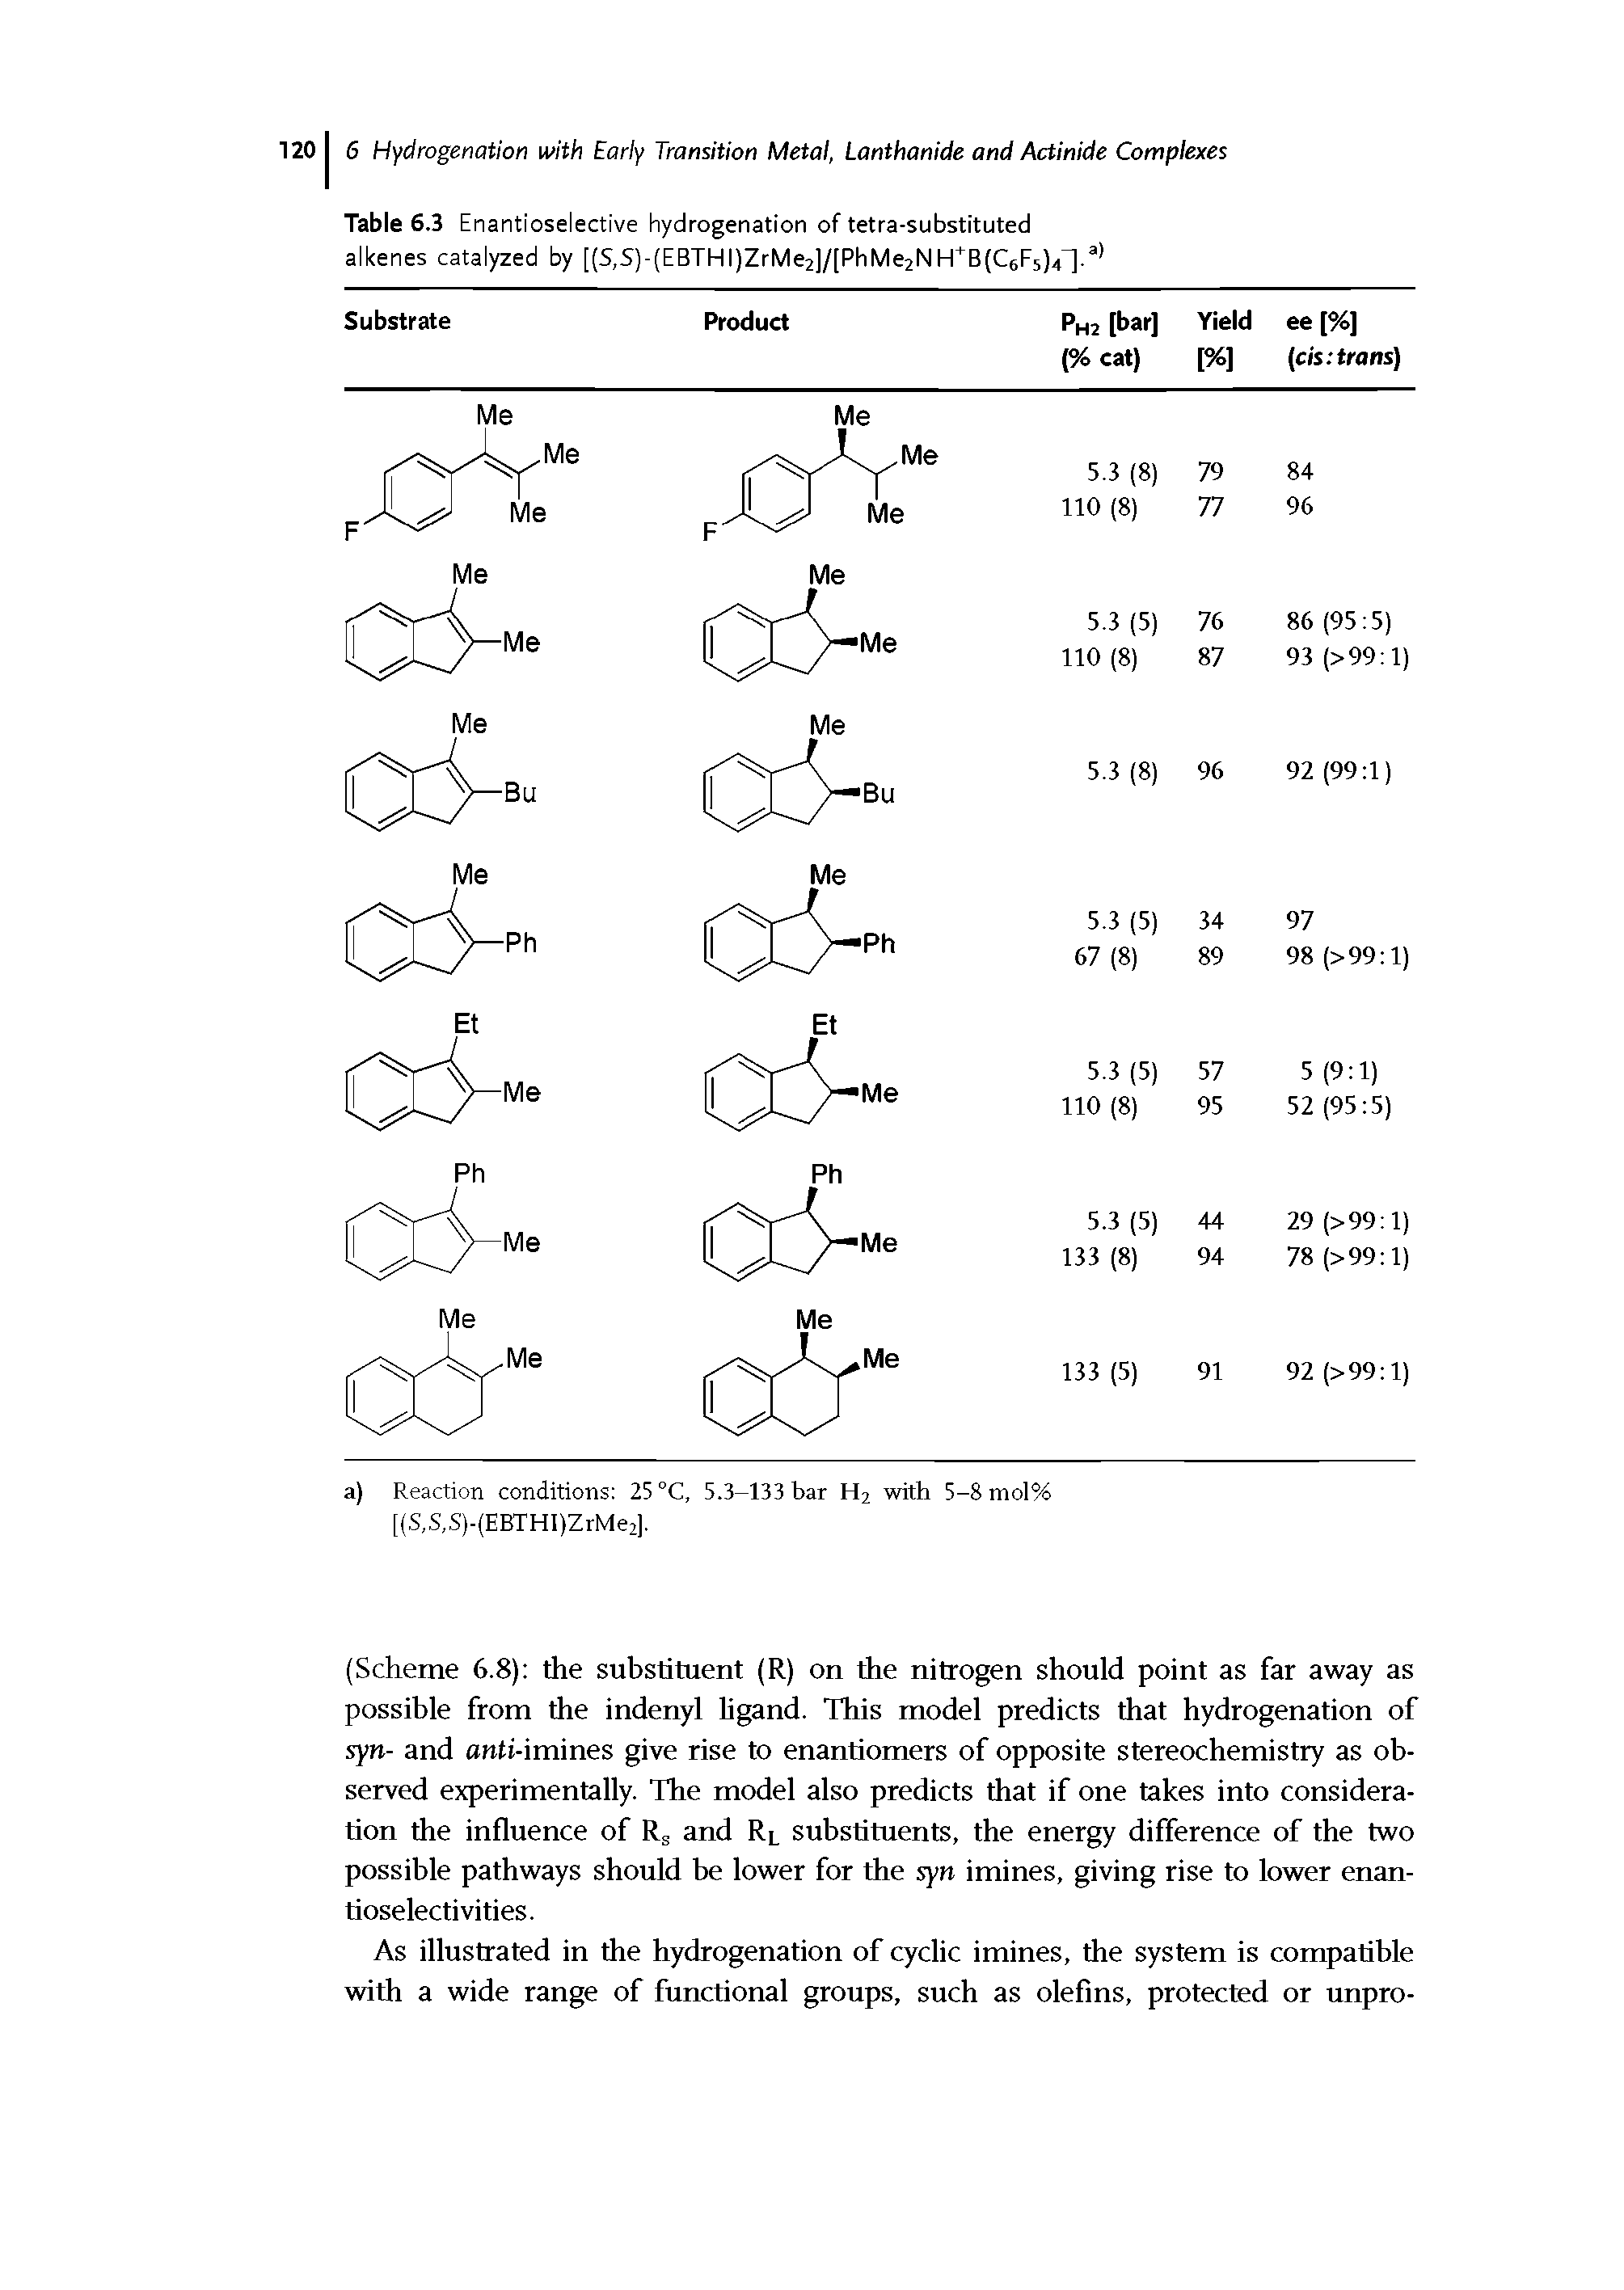 Table 6.3 Enantioselective hydrogenation of tetra-substituted alkenes catalyzed by [(S,S)-(EBTHI)ZrMe2]/[PhMe2NH+B(C6F5)4V)...